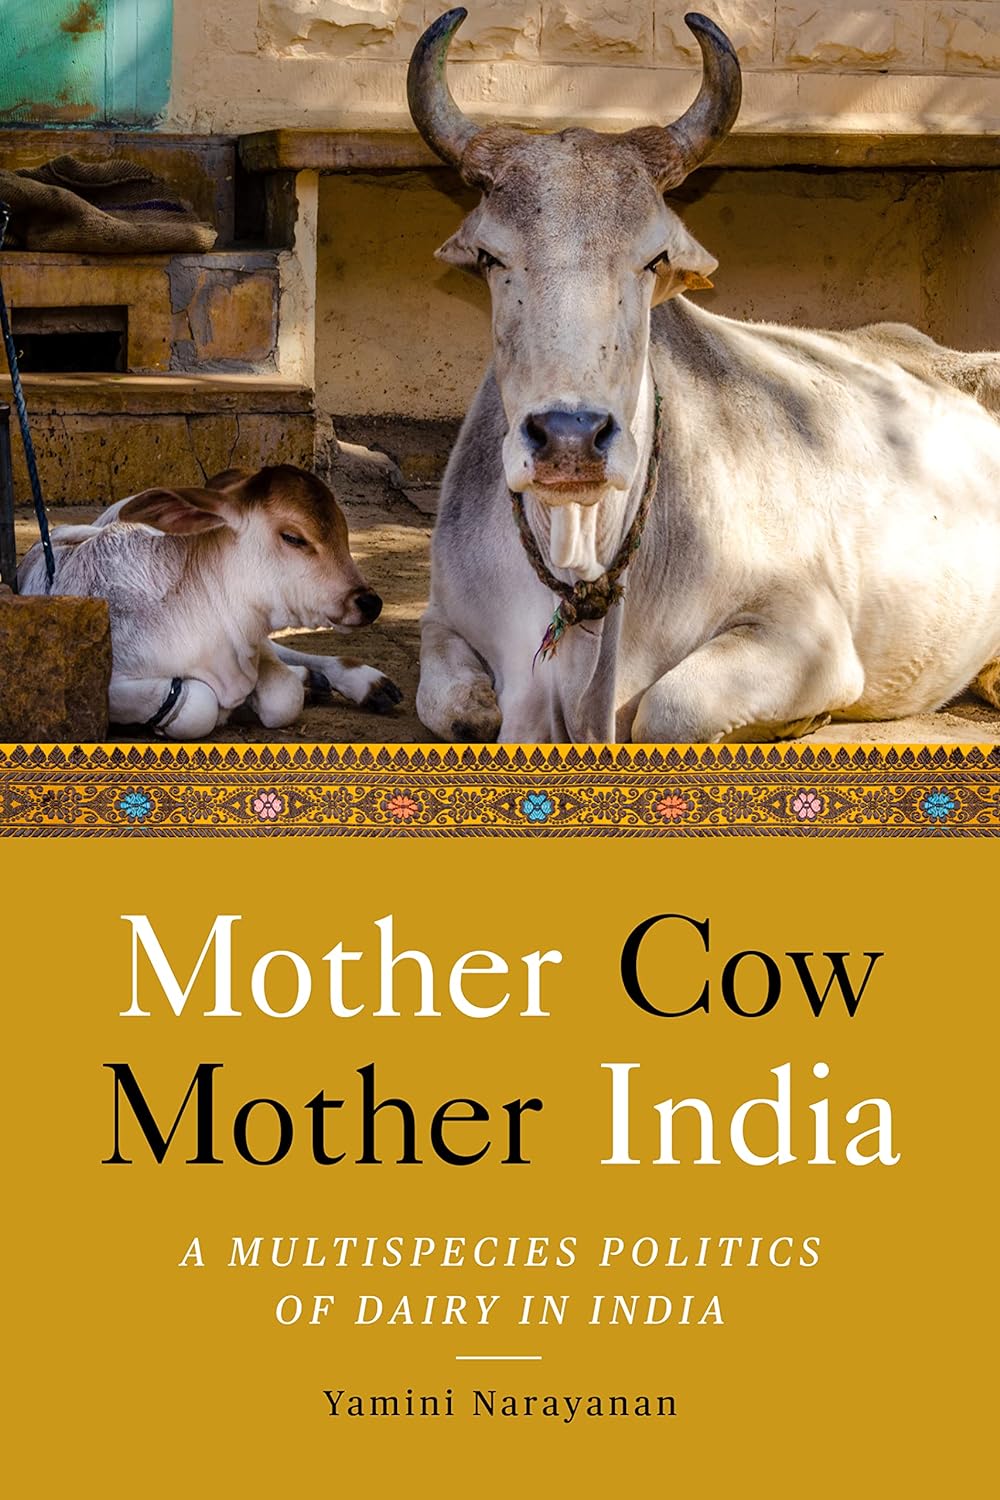 Mother Cow, Mother India: A Multispecies Politics of Dairy in India